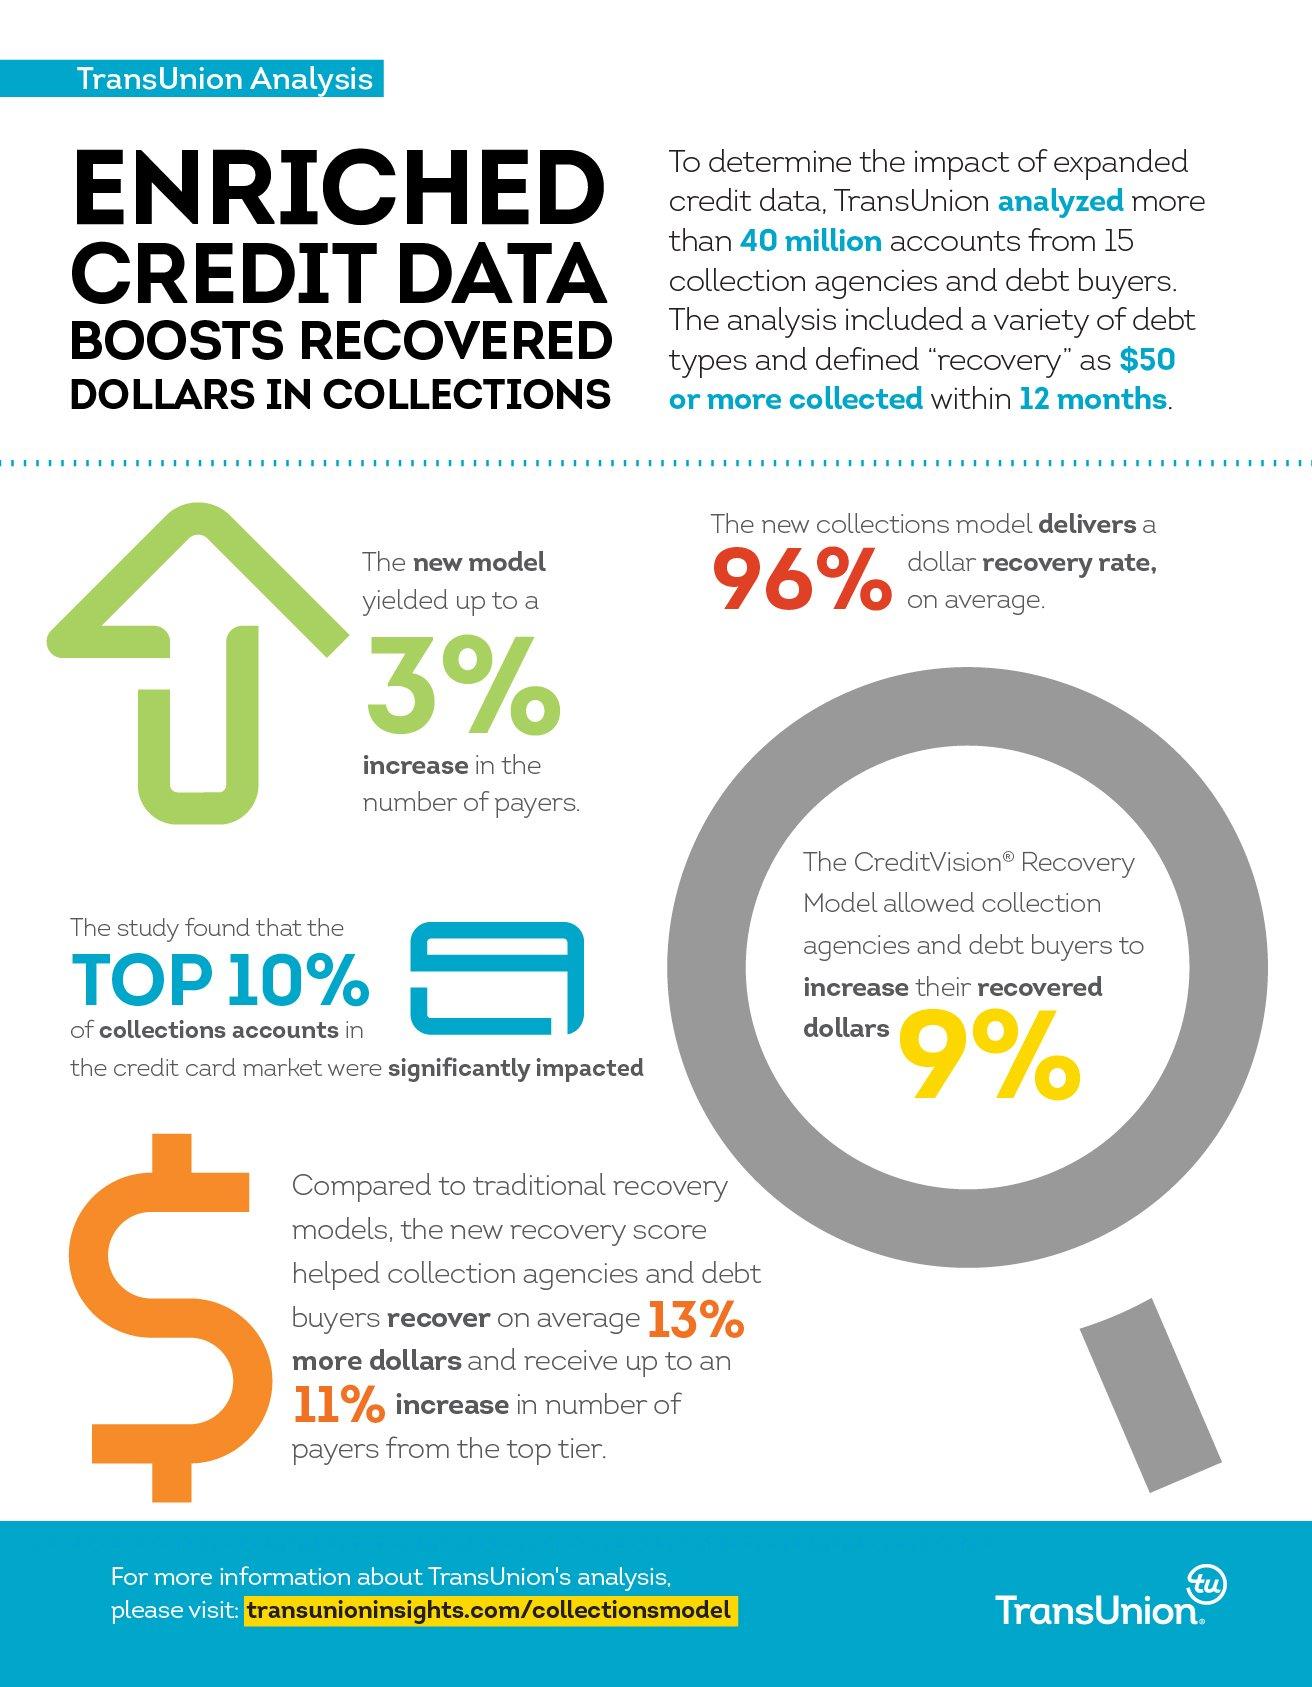 New TransUnion Analysis Finds Enriched Data Boosts Recovered Dollars in ...